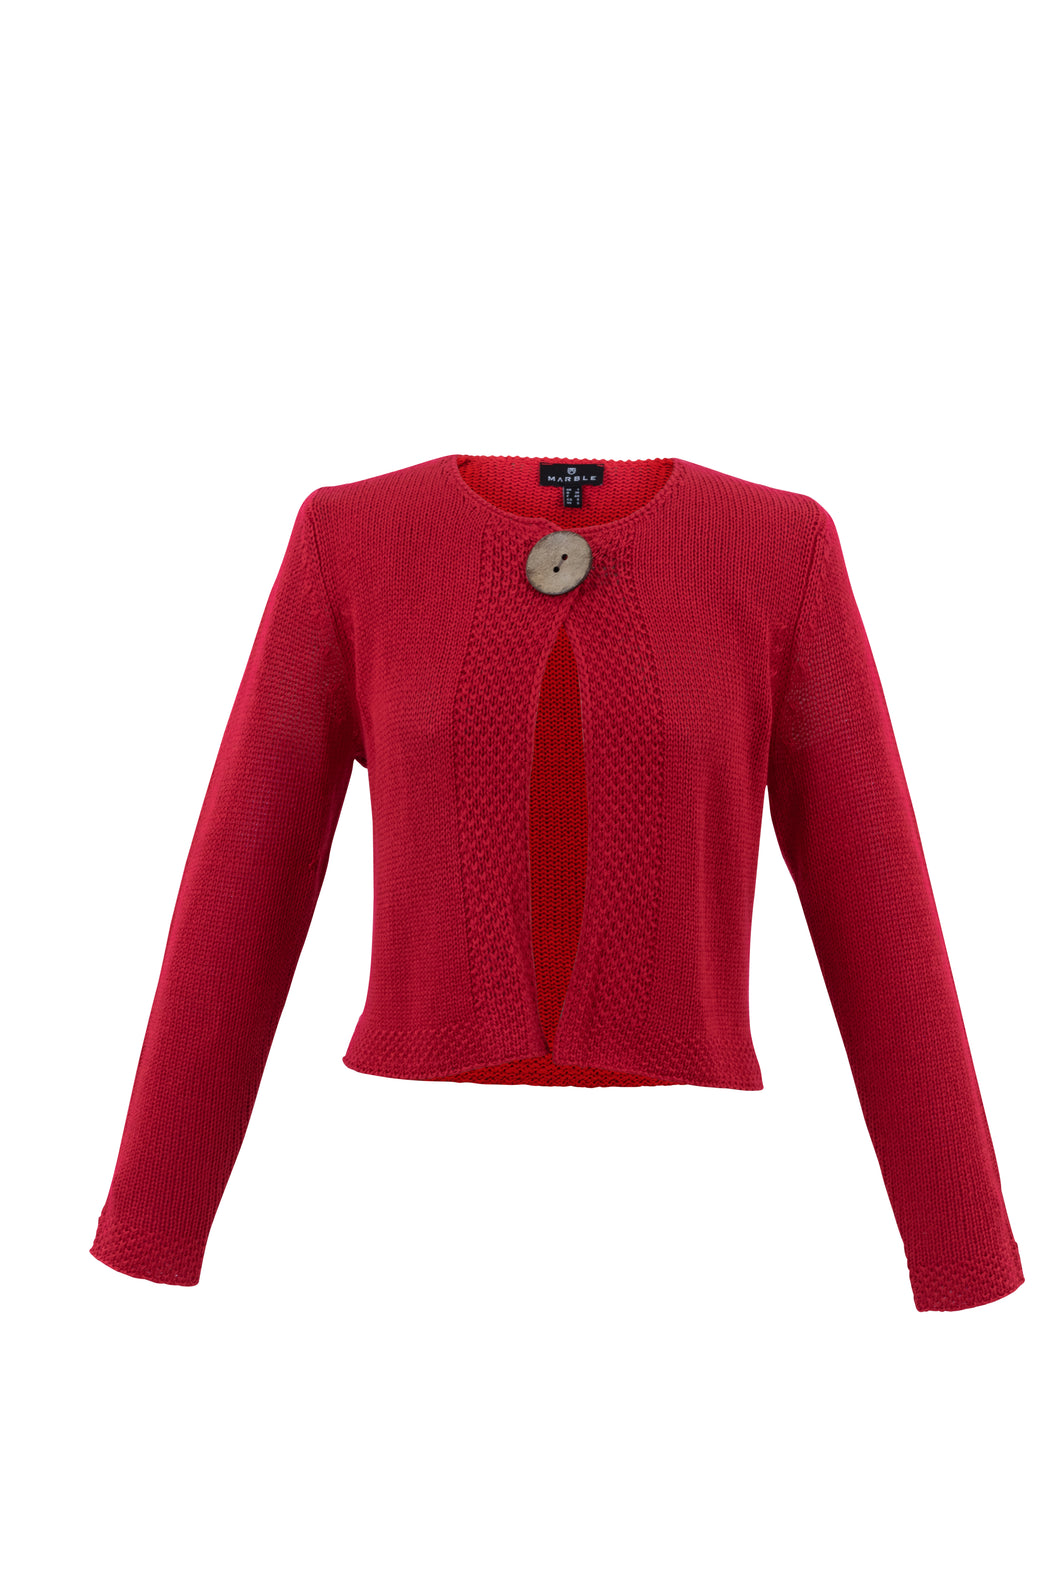 MARBLE CARDIGAN 6515 IN COL 109 RED